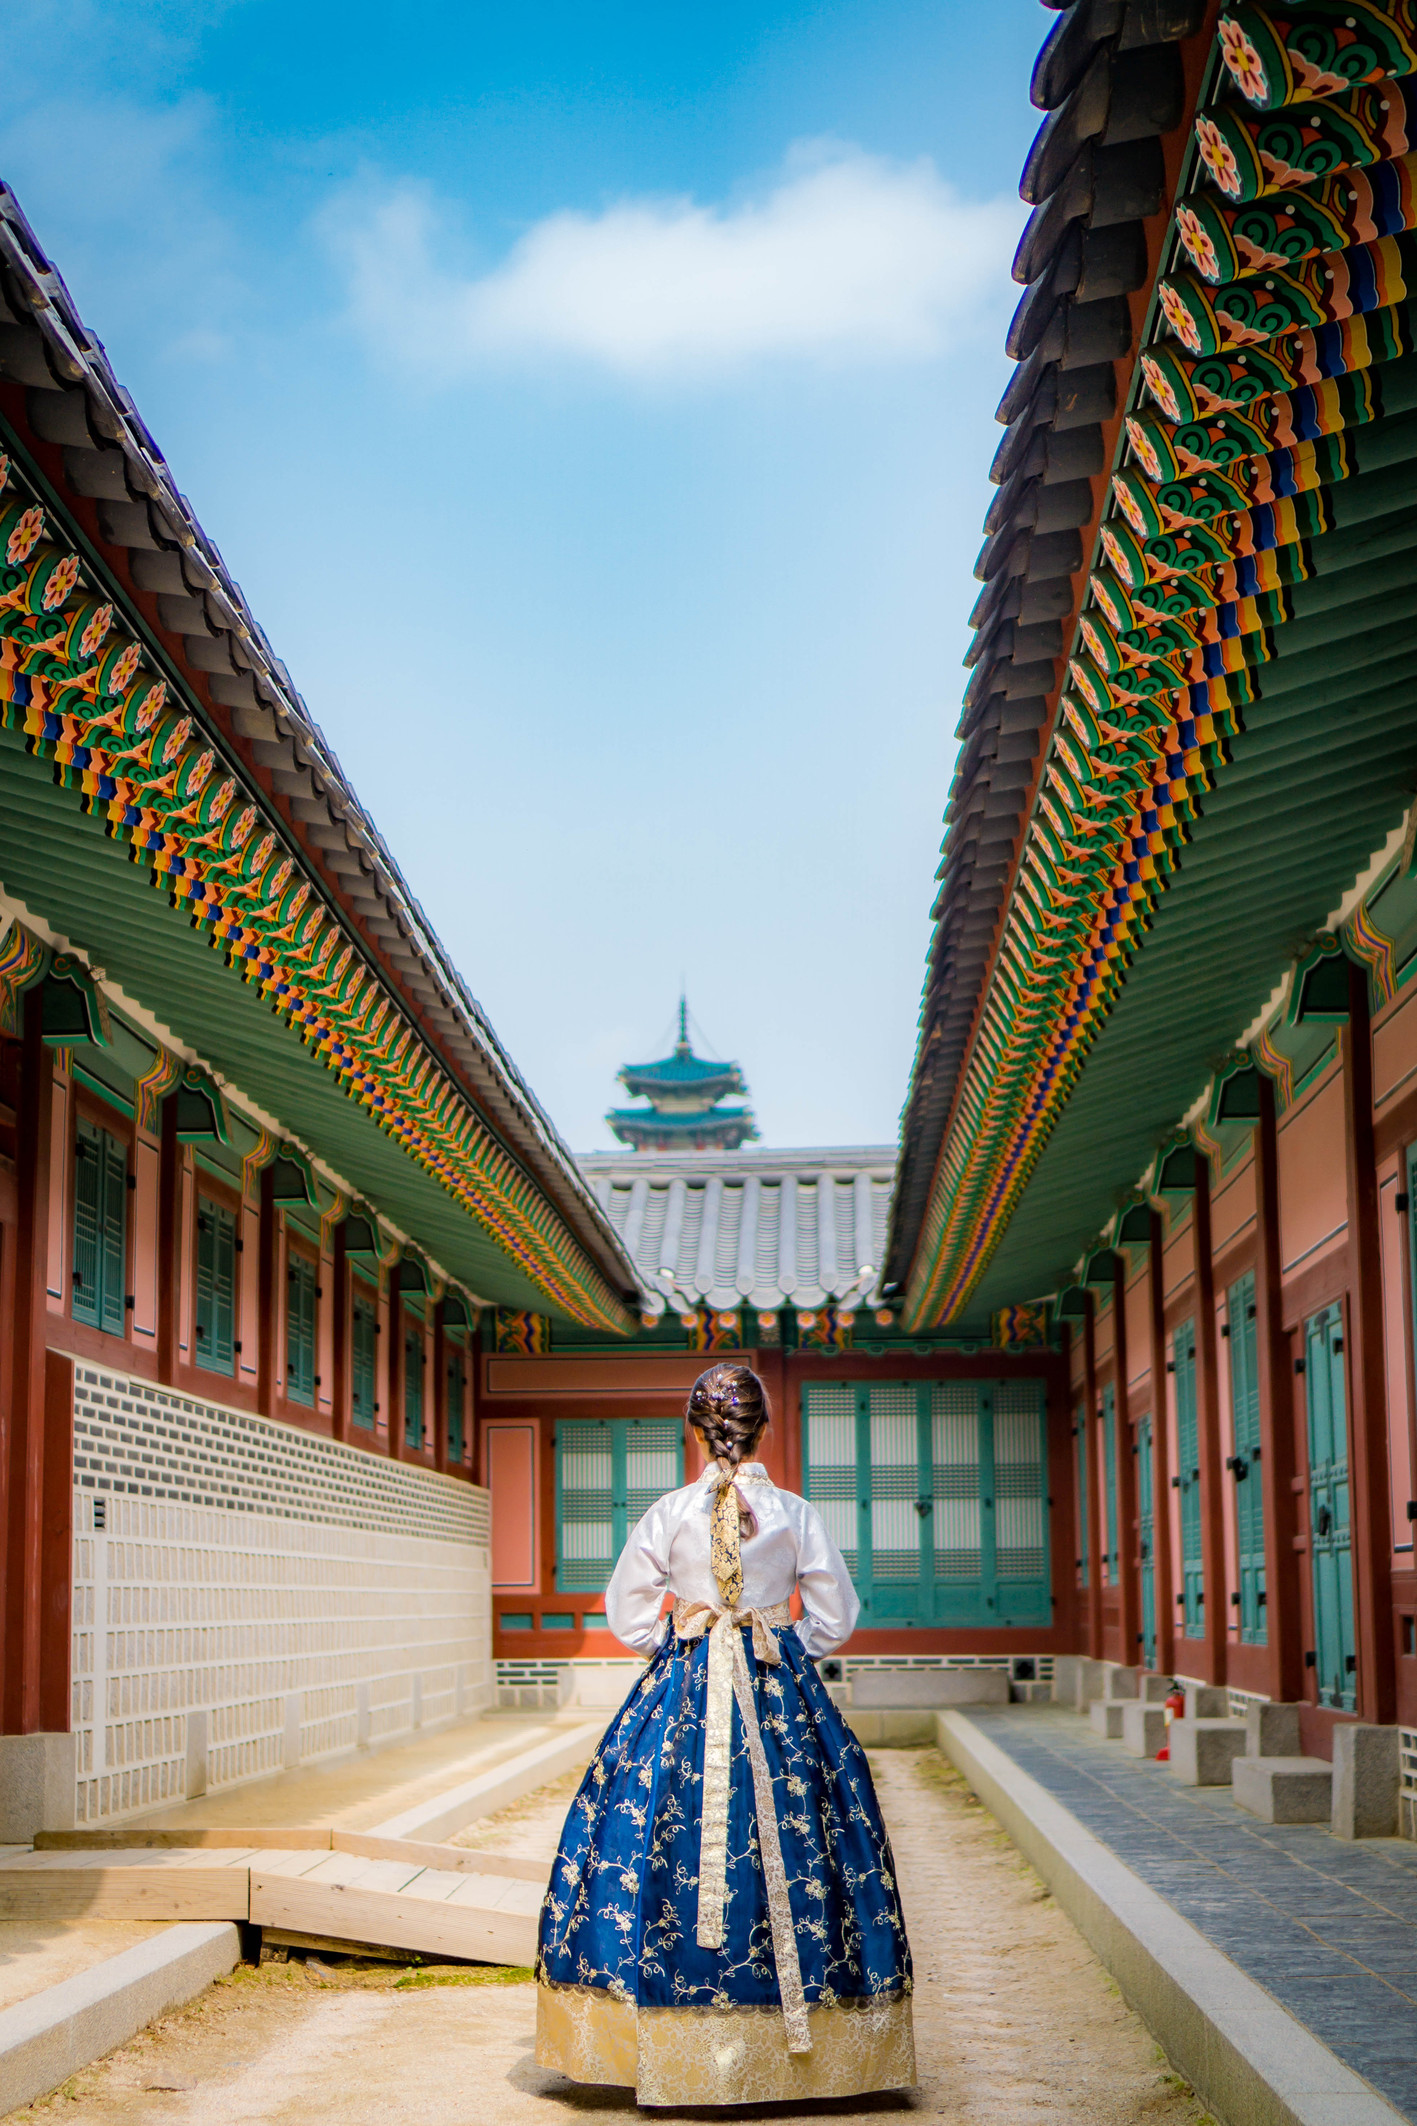 Traditional clothing of East Asia that speaks history